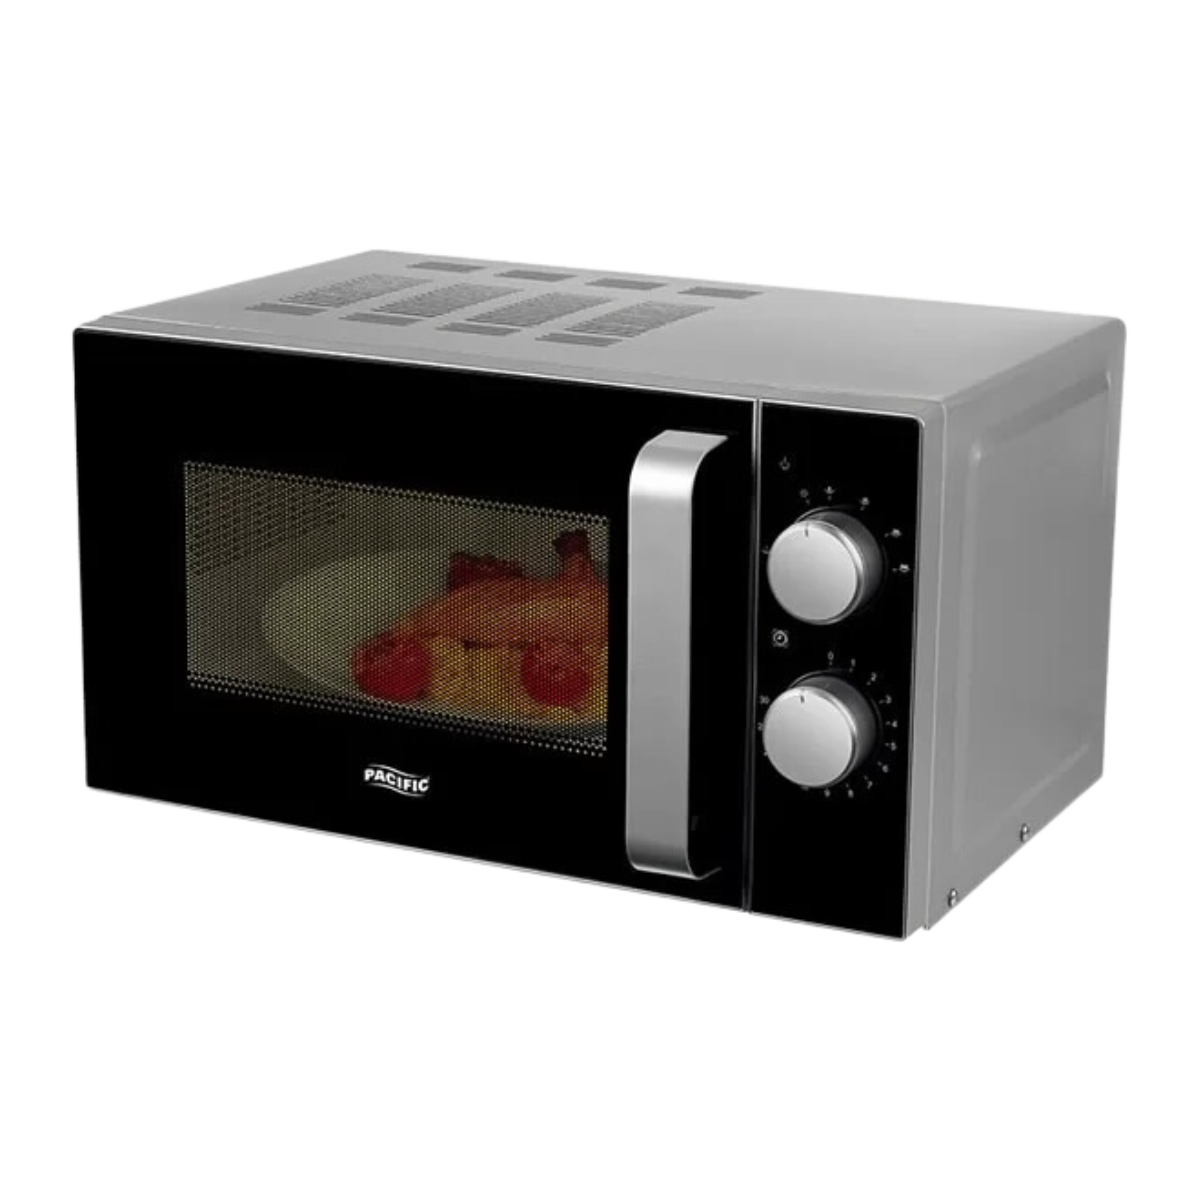 PACIFIC PM777 MICROWAVE OVEN 20LTS